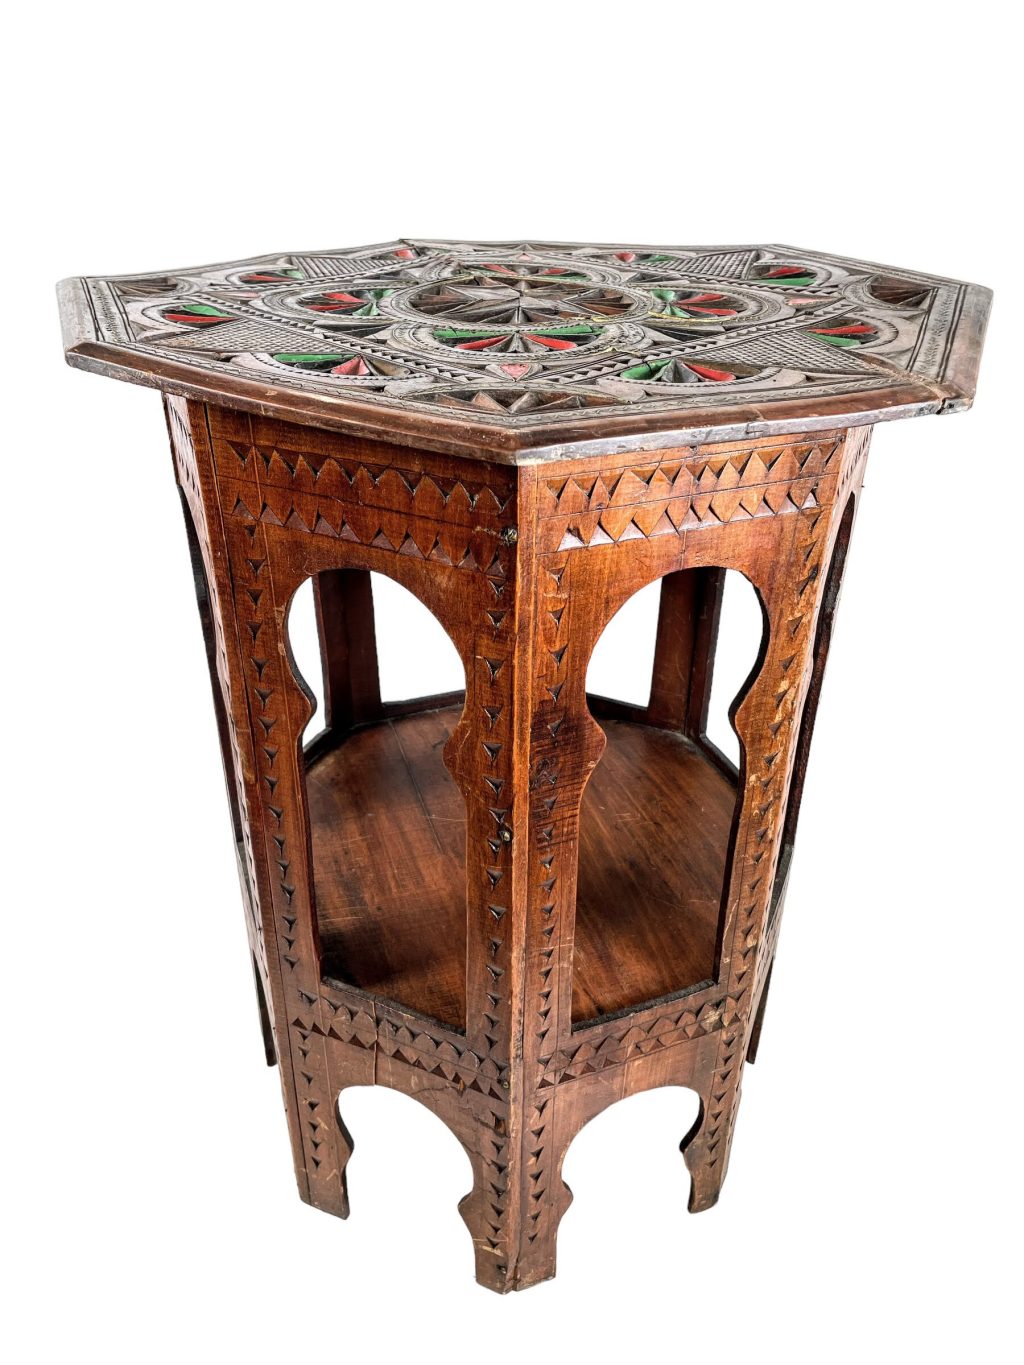 Vintage Moroccan Intricately Inlaid Brass Wood Wooden Table Hand Painted Boho Damaged – REPAIRS NEEDED c1960’s